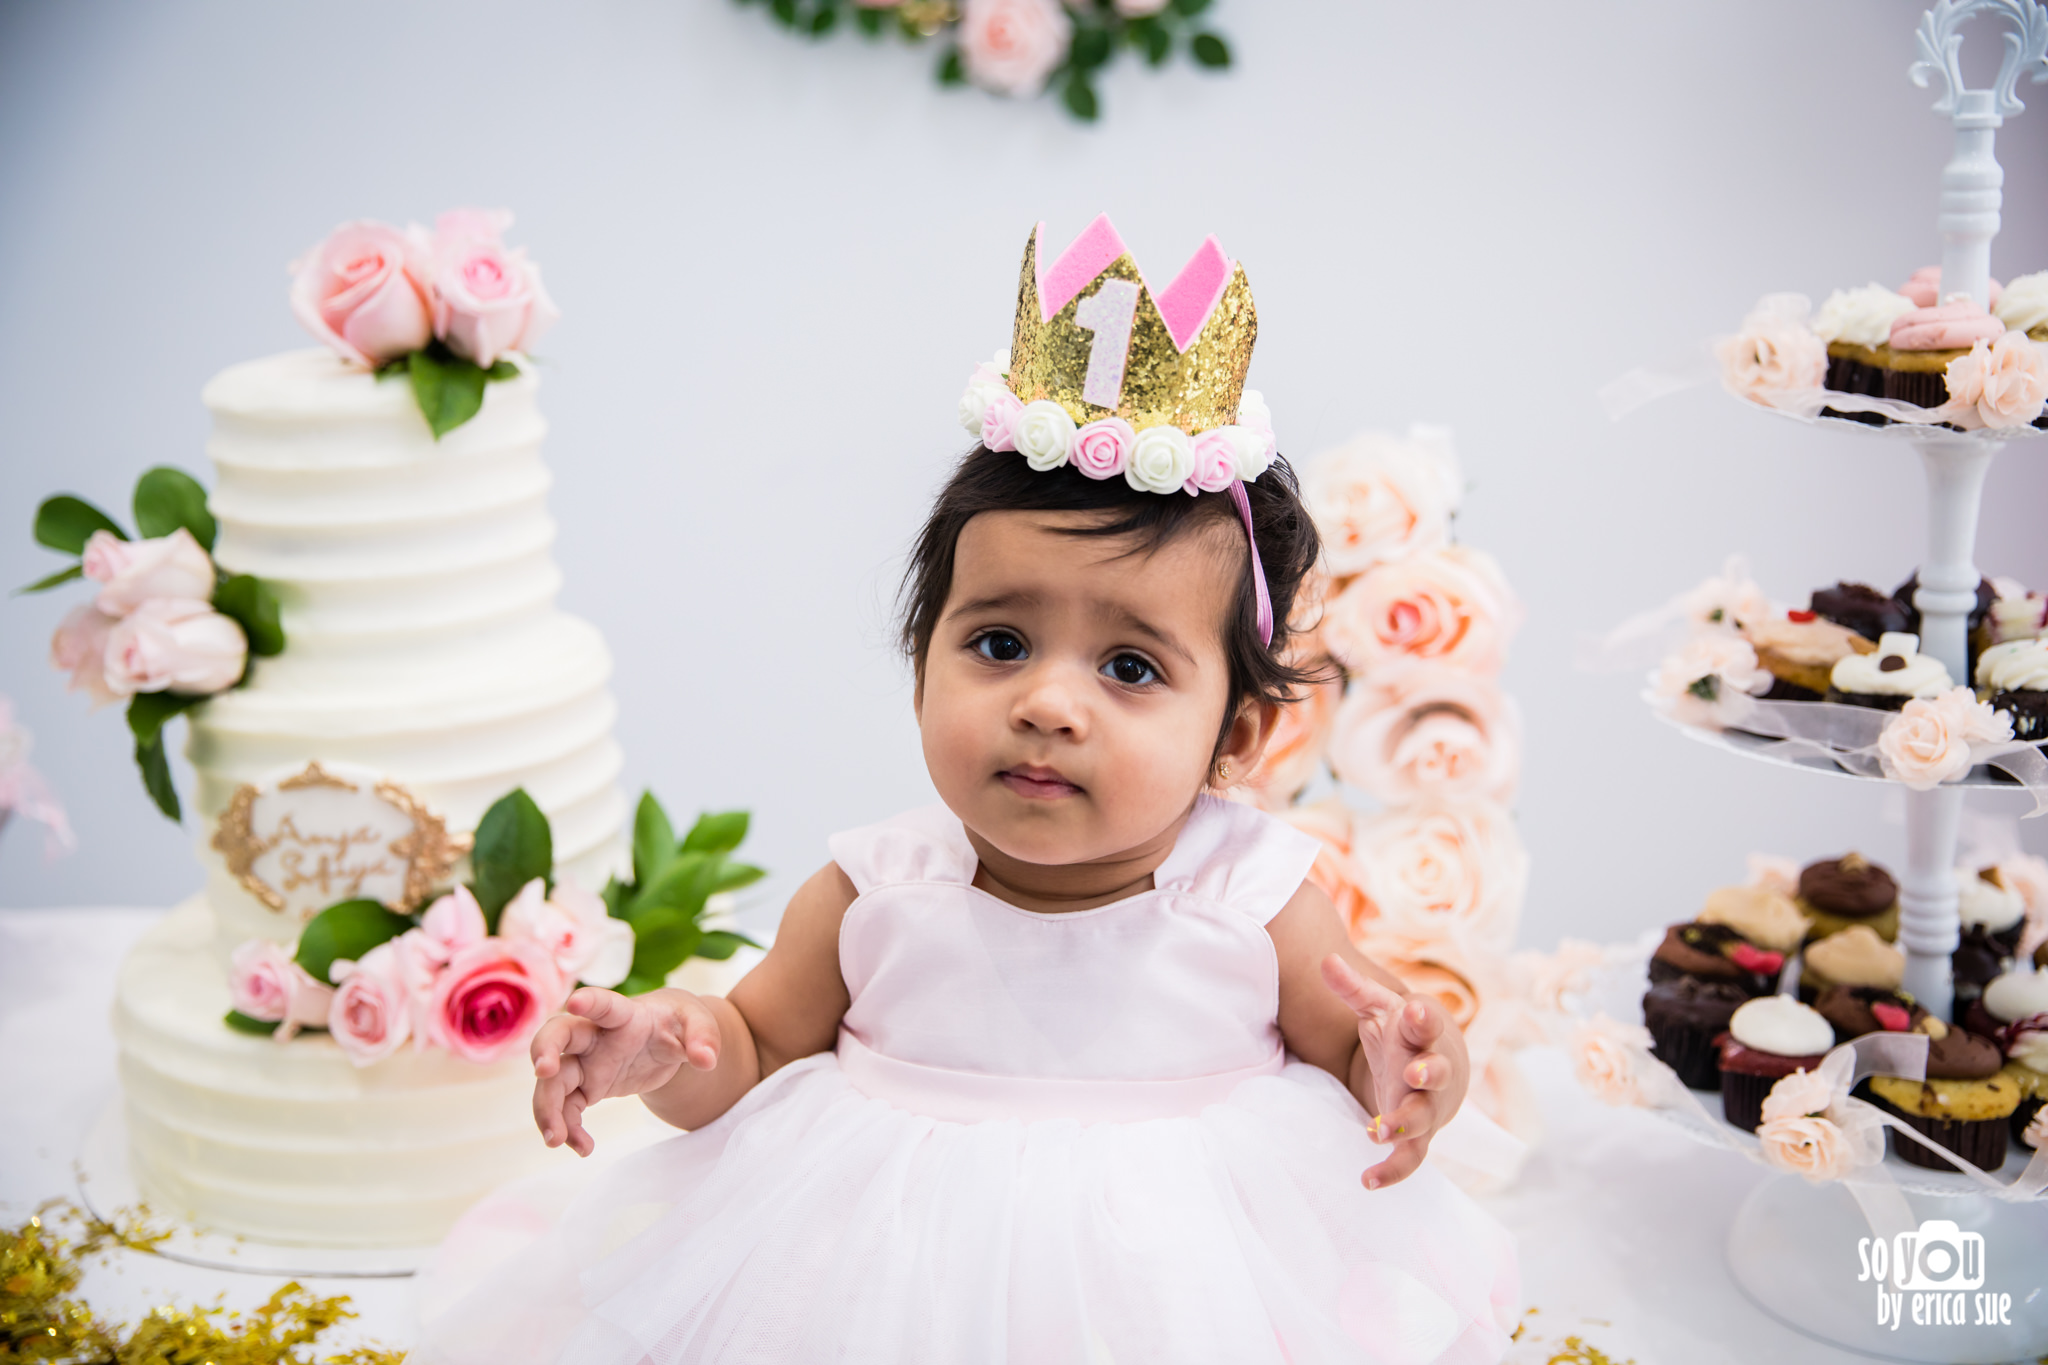 so-you-by-erica-sue-first-birthday-photographer-pembroke-pines-5412.jpg